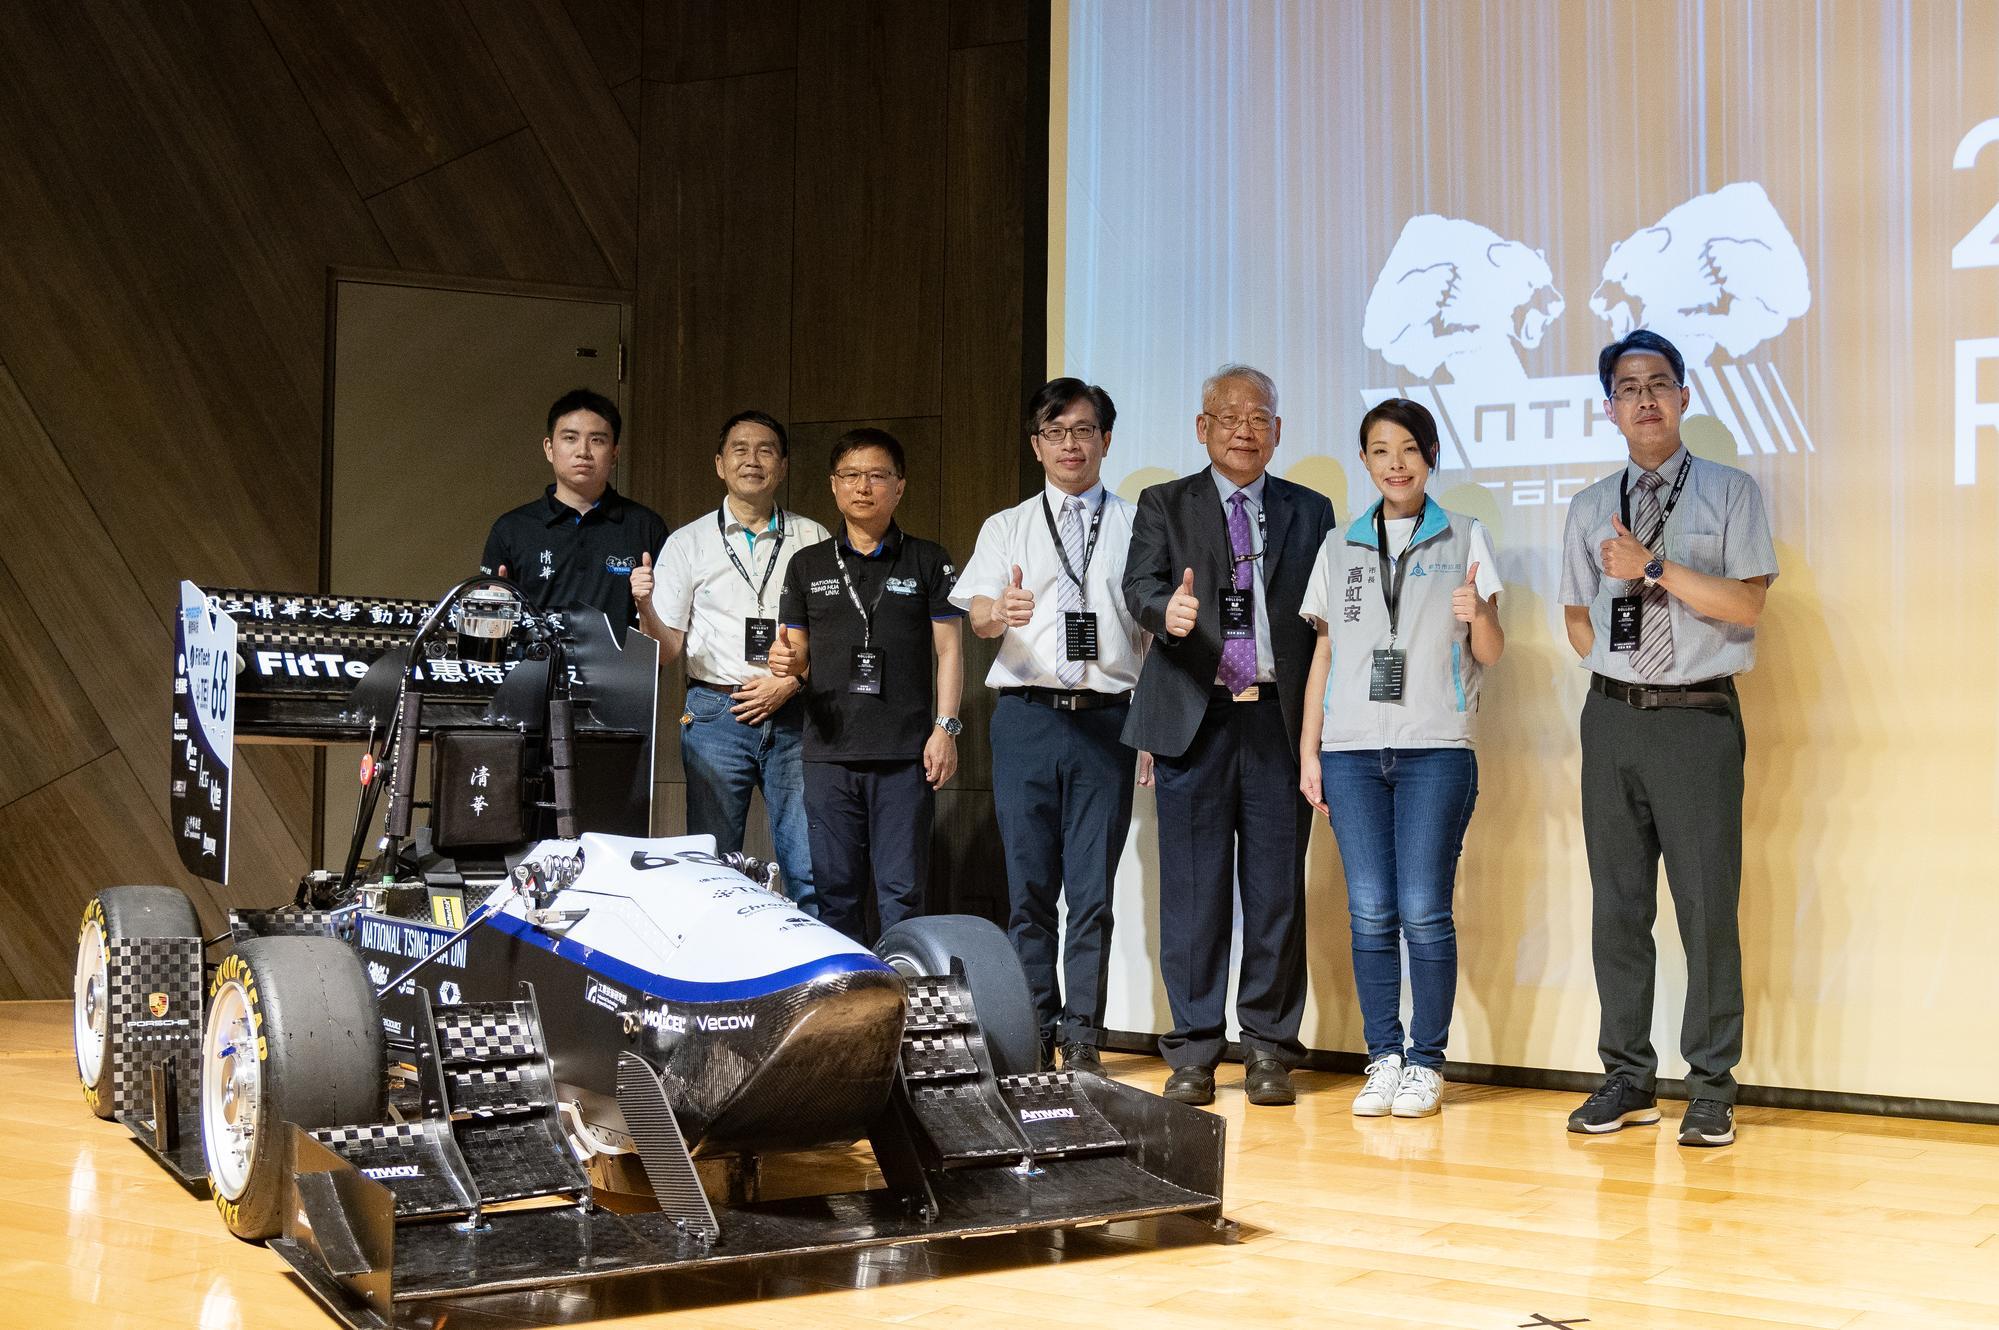 From left to right: Hong-jyun Bai (白泓均), captain of the NTHU Racing Team, Prof. Pei-jen Wang (王培仁), Prof. Chao-an Lin (林昭安), Dean Hung-yin Tsai (蔡宏營) of the College of Engineering, NTHU Vice President Nyan-hwa Tai (戴念華), Hsinchu City Mayor Hung-an Kao (高虹安), and Chair Chih-yung Huang (黃智永) of the Department of Power Mechanical Engineering.